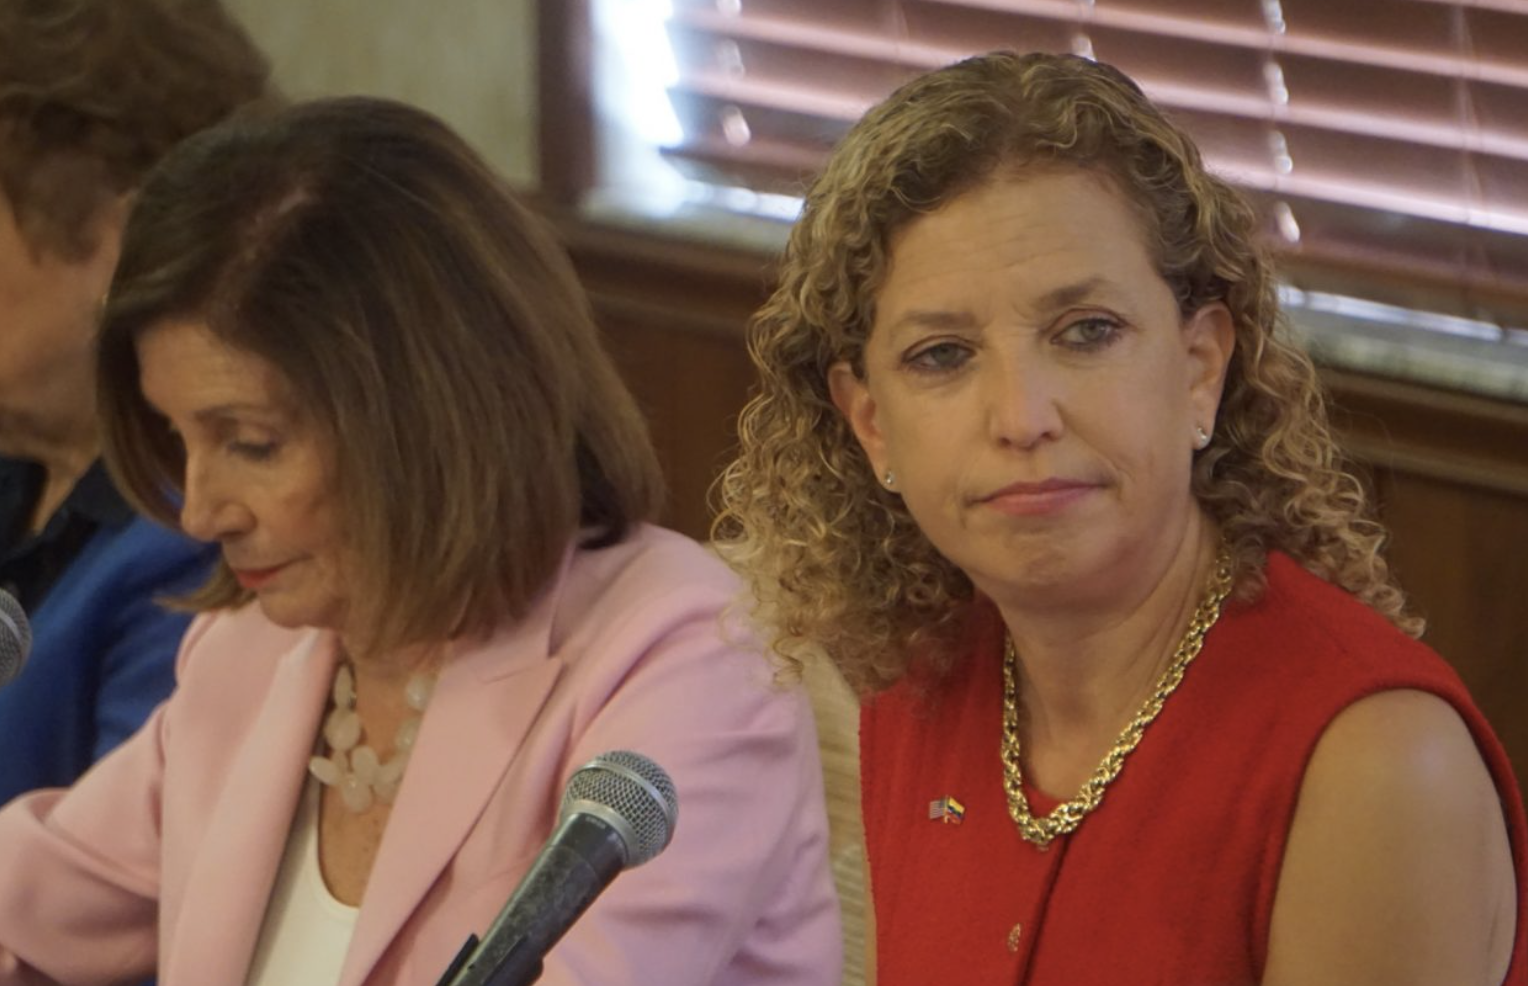 Spalding Reasserts call for Rep. Wasserman Schultz  to Take 'Cognitive Examination